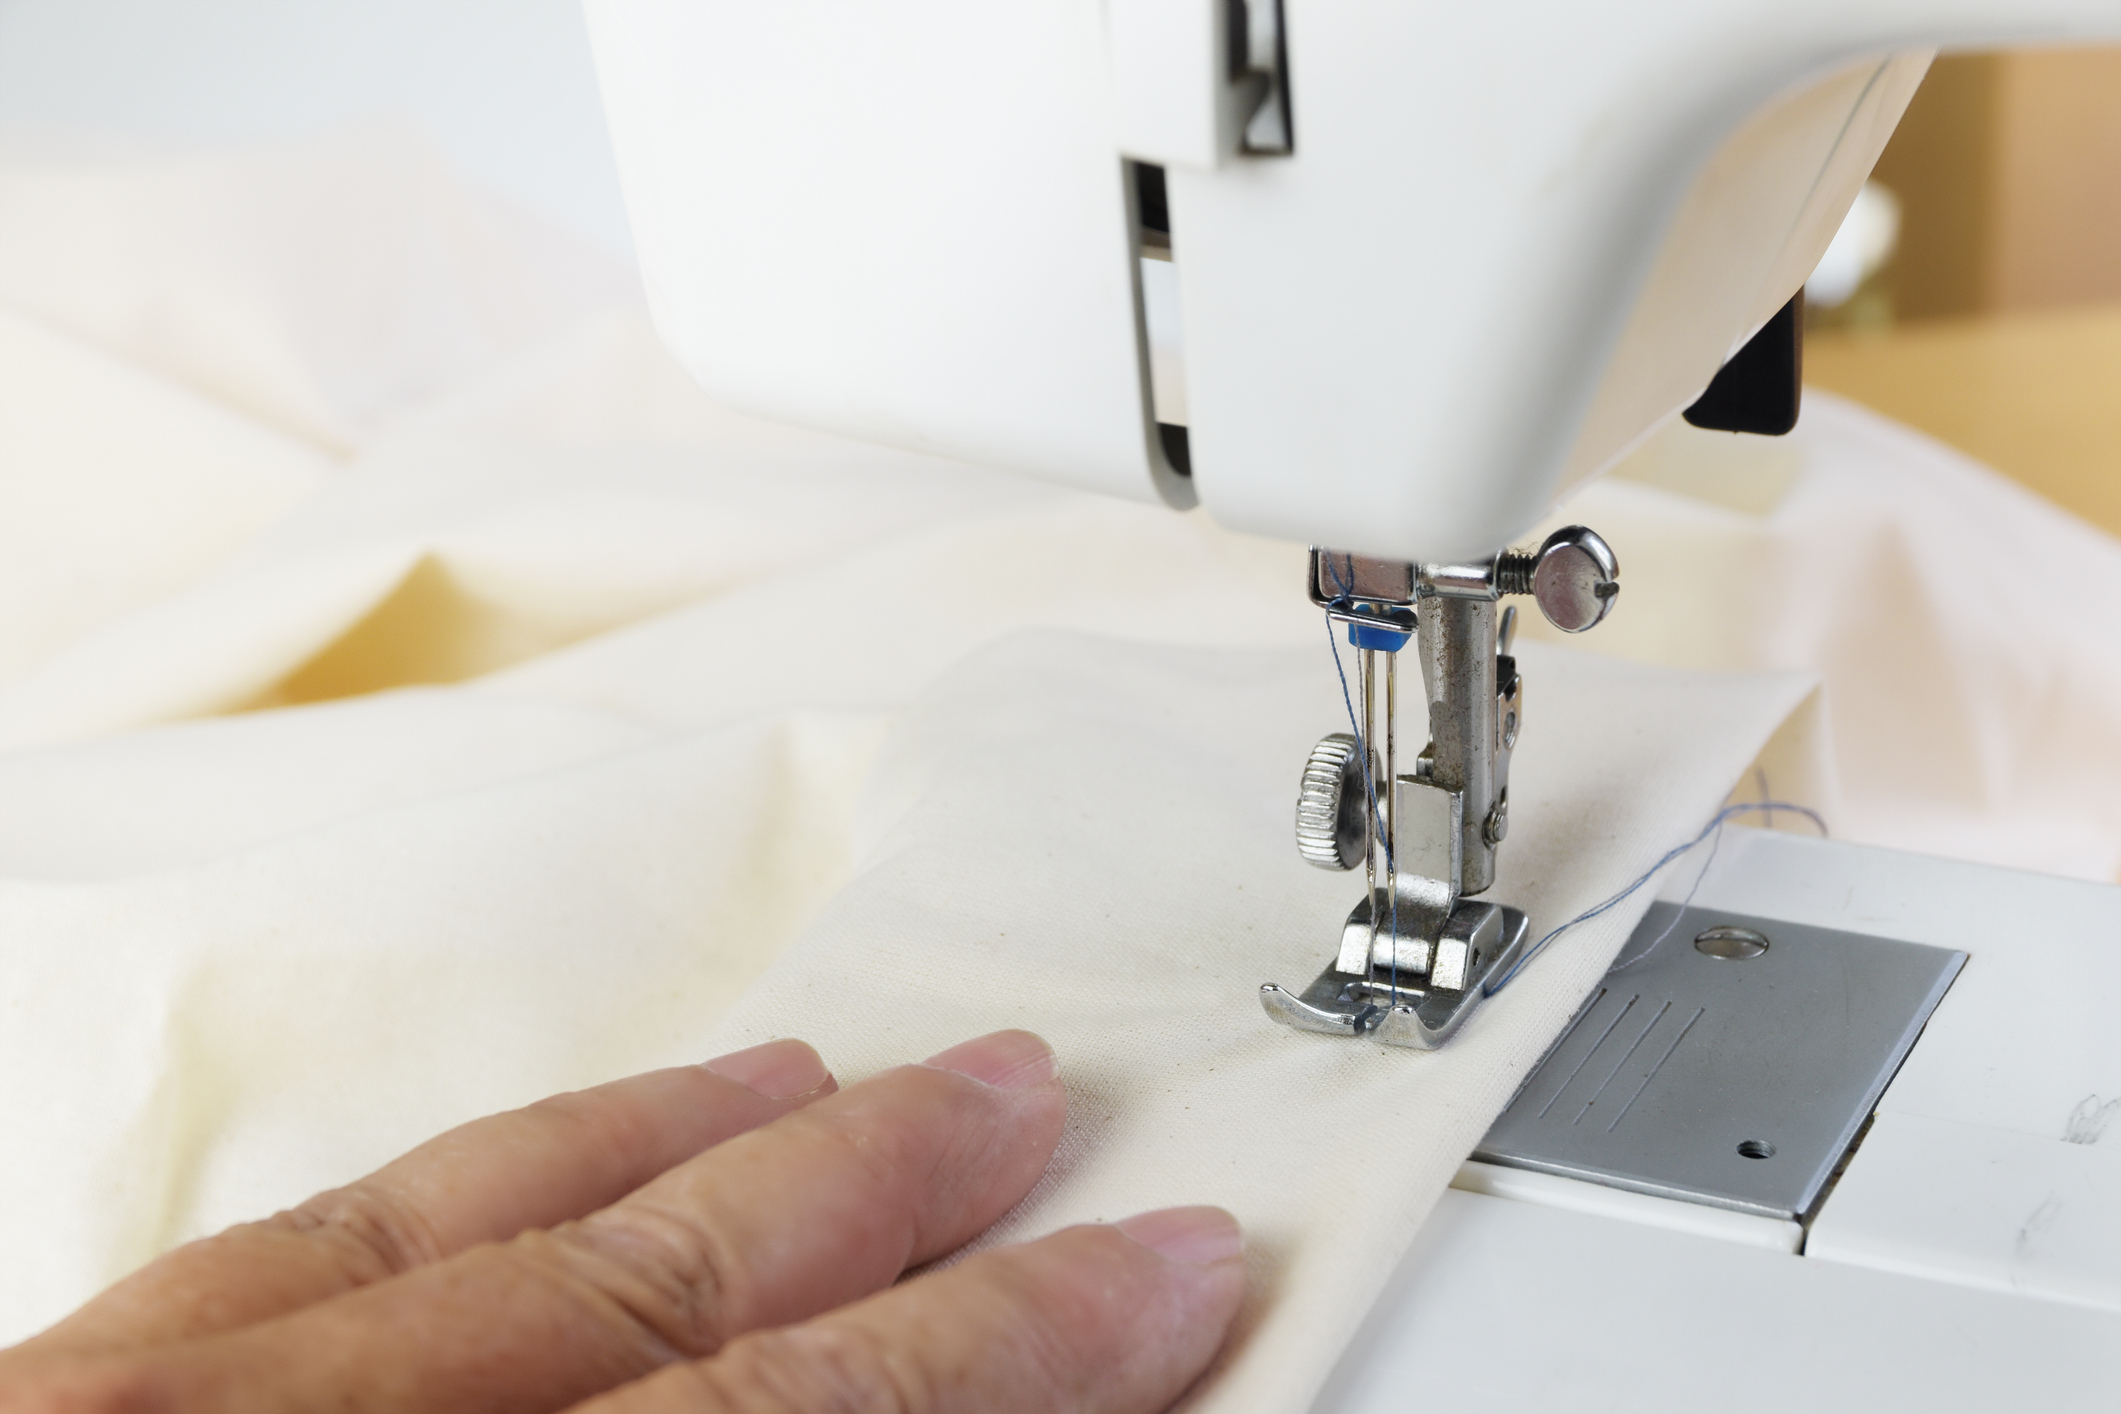 Getting to know your sewing machine